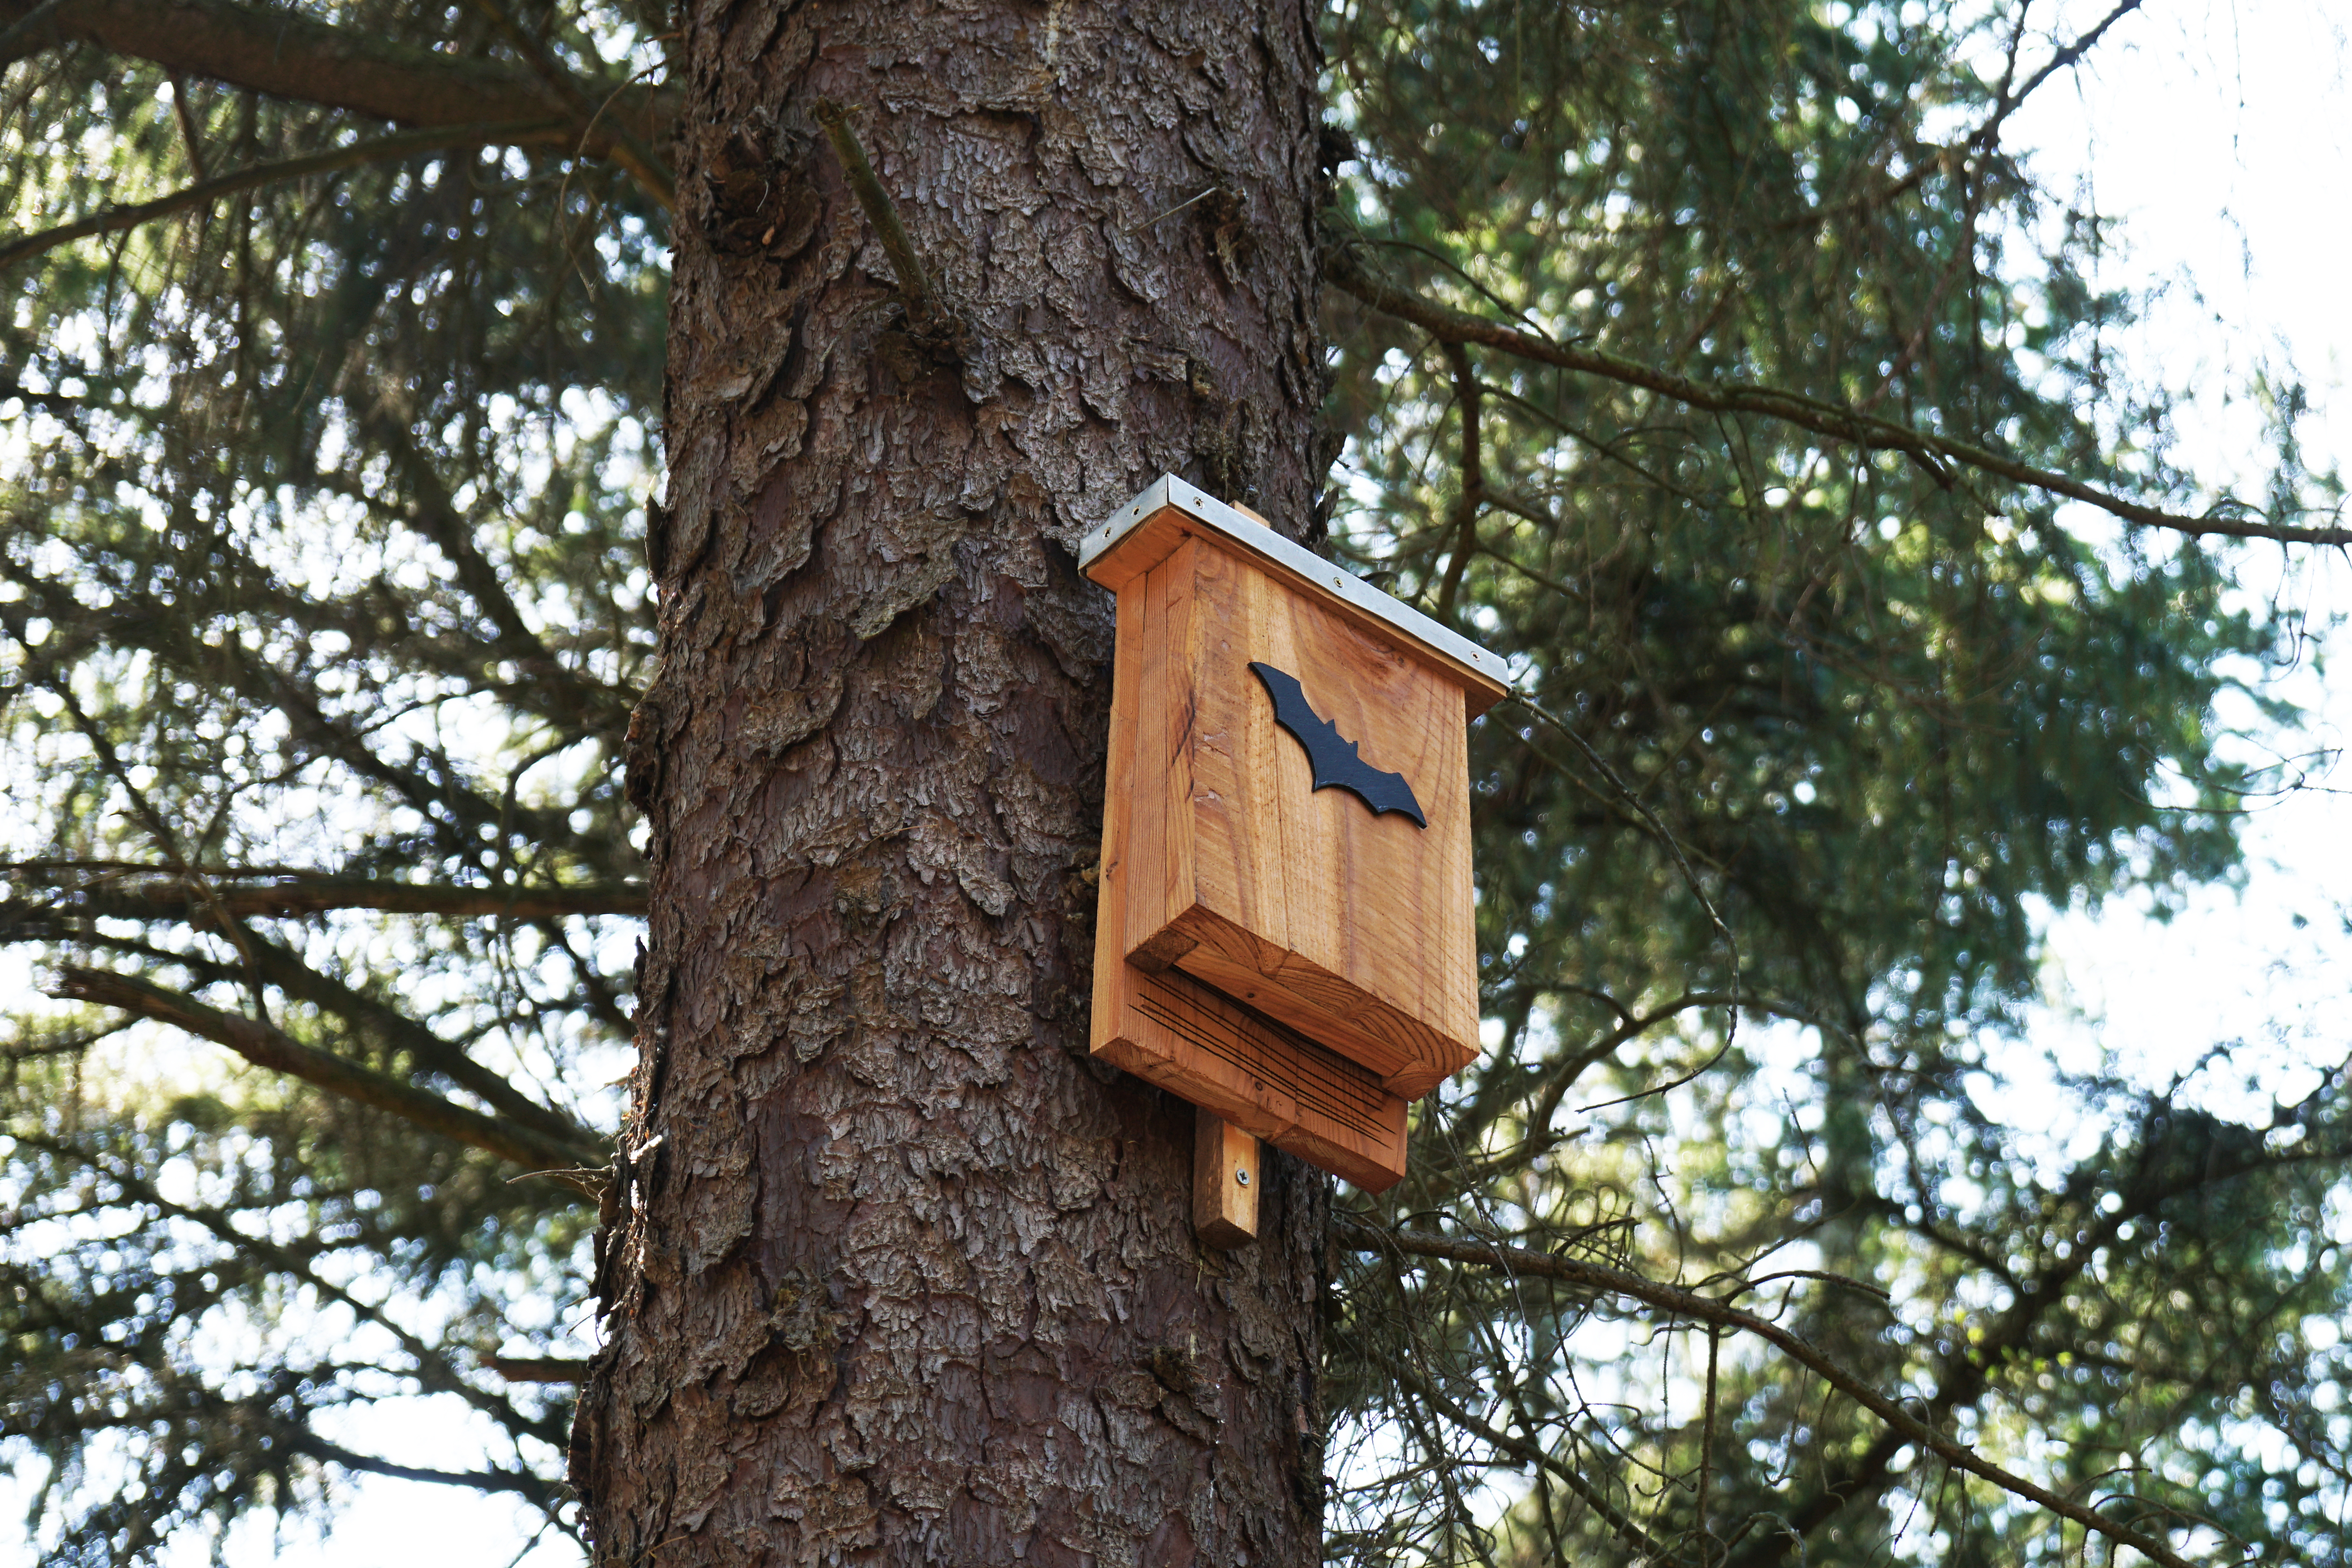 Do Bat Boxes Work? Call Elite Wildlife Services and keep bats out of your home.